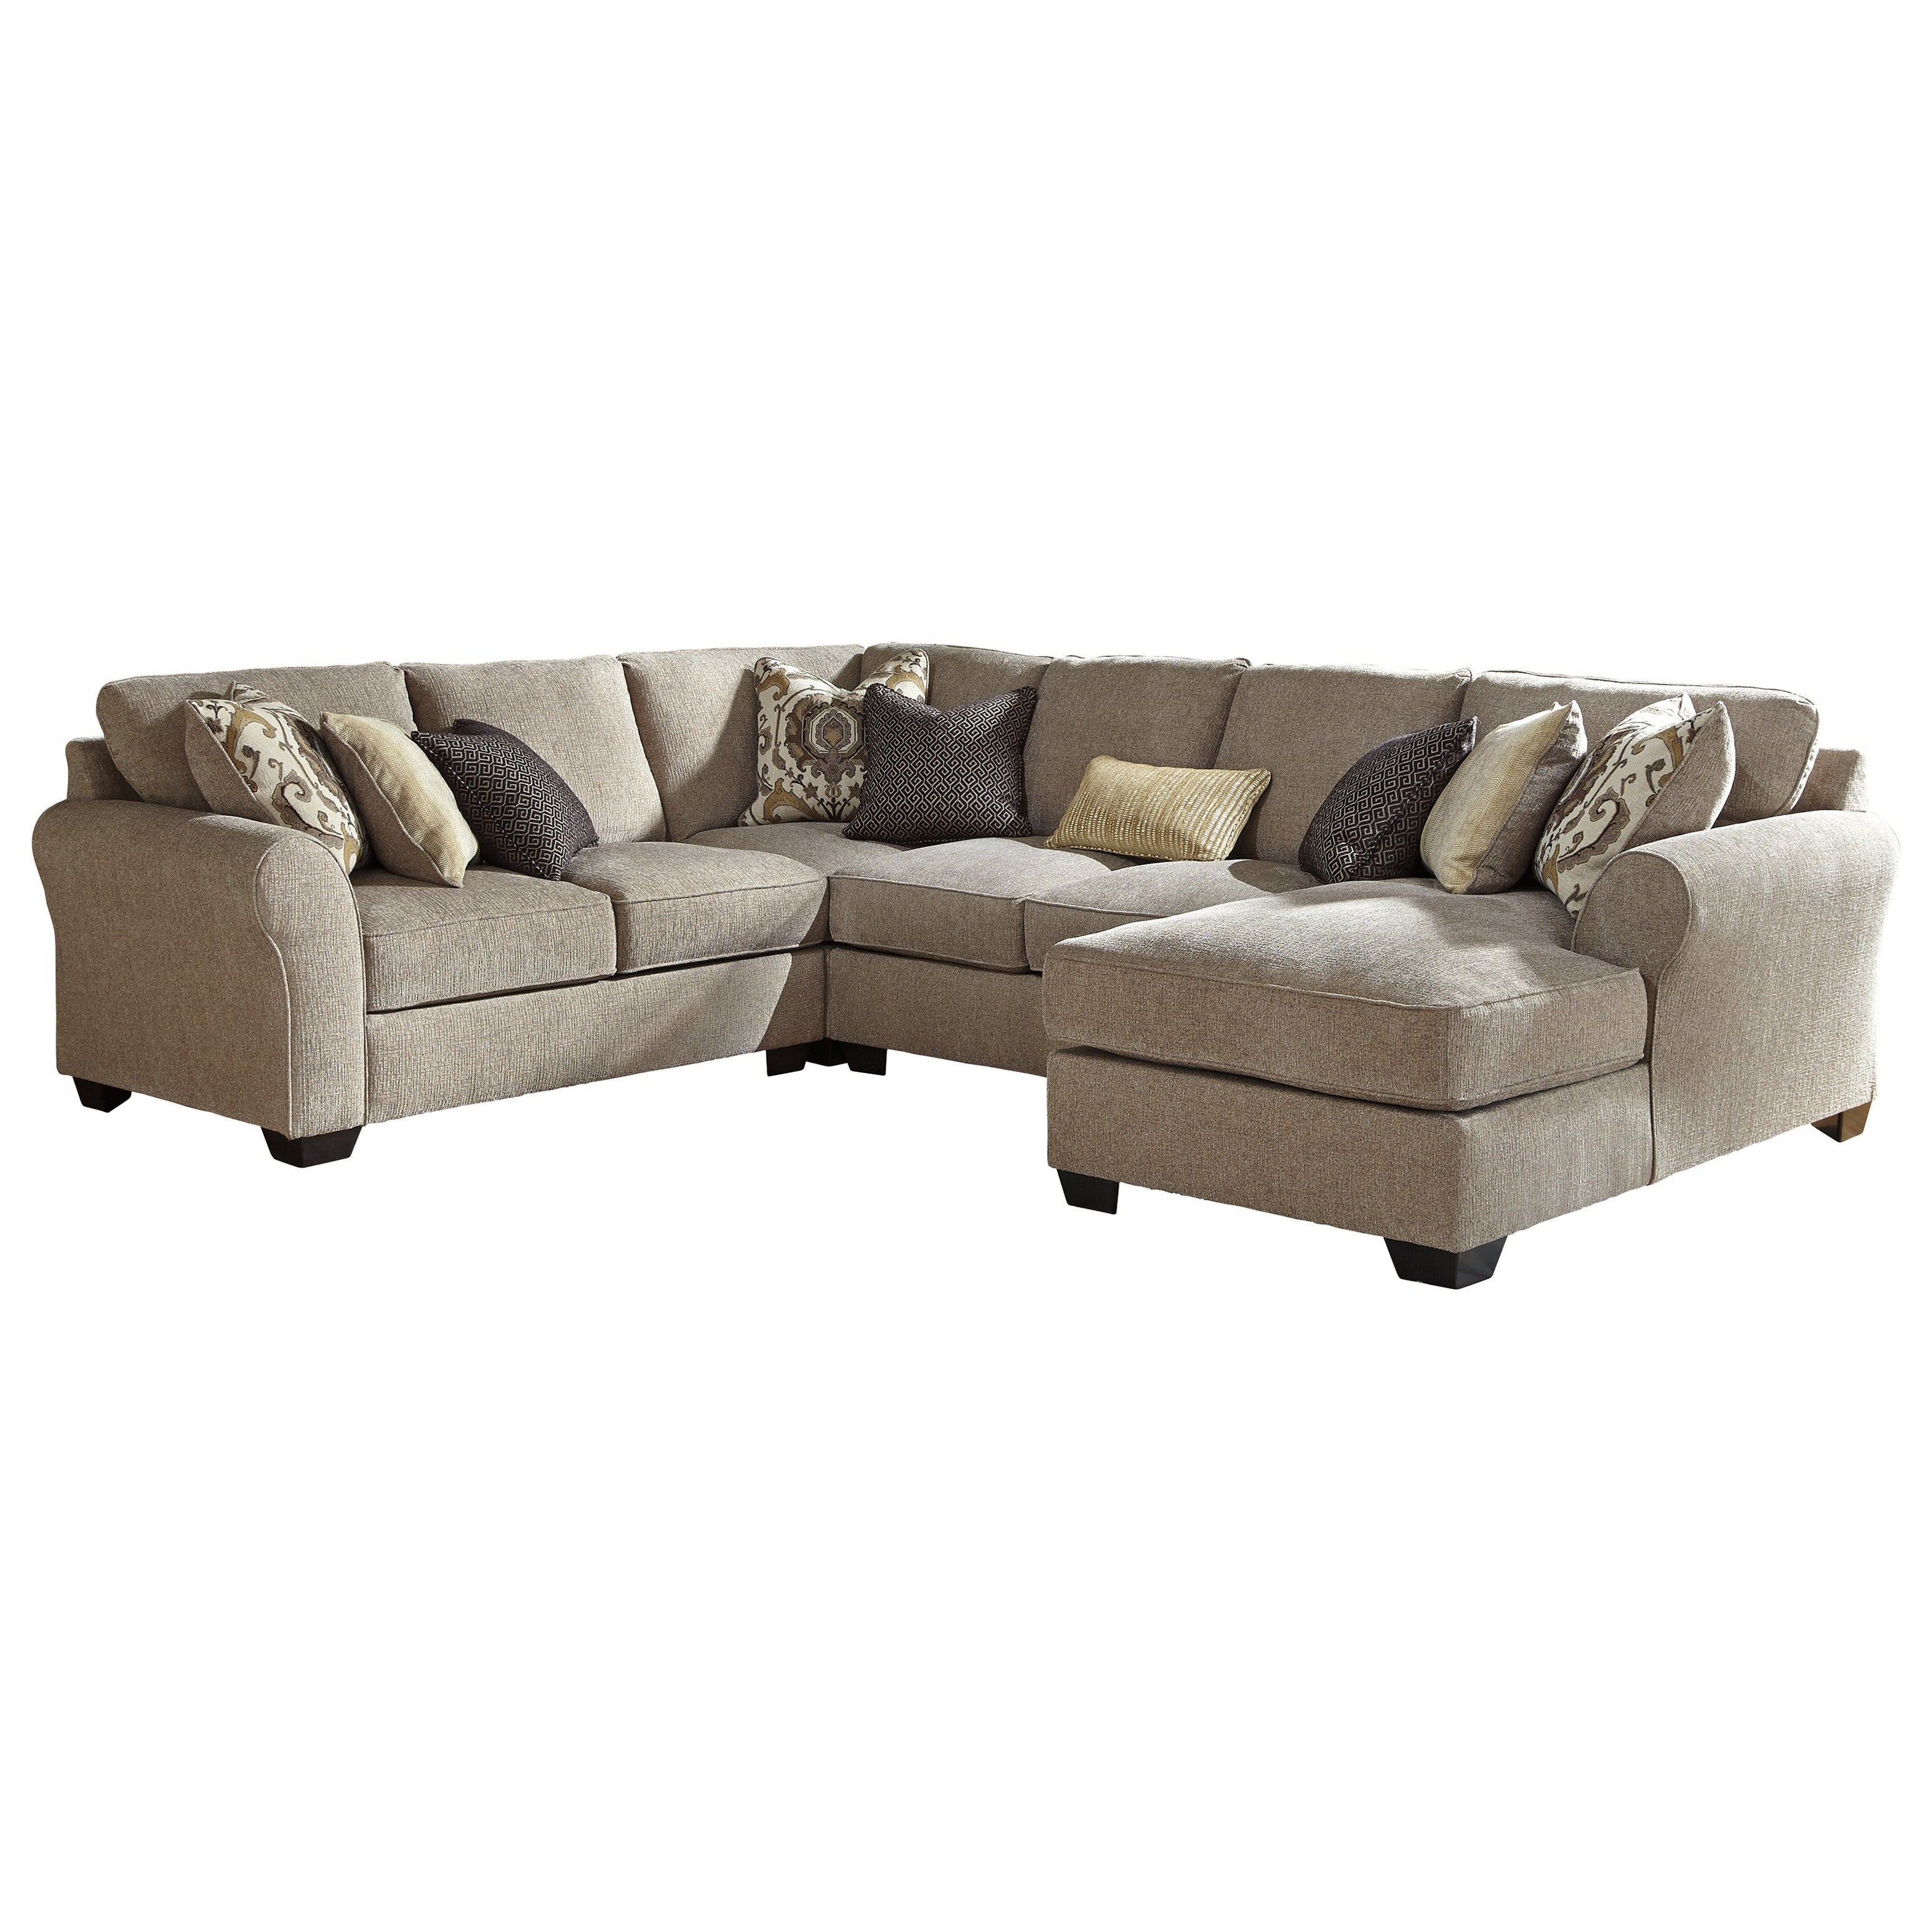 Pantomine 4-Piece Sectional with Chaise Ash-39122S6